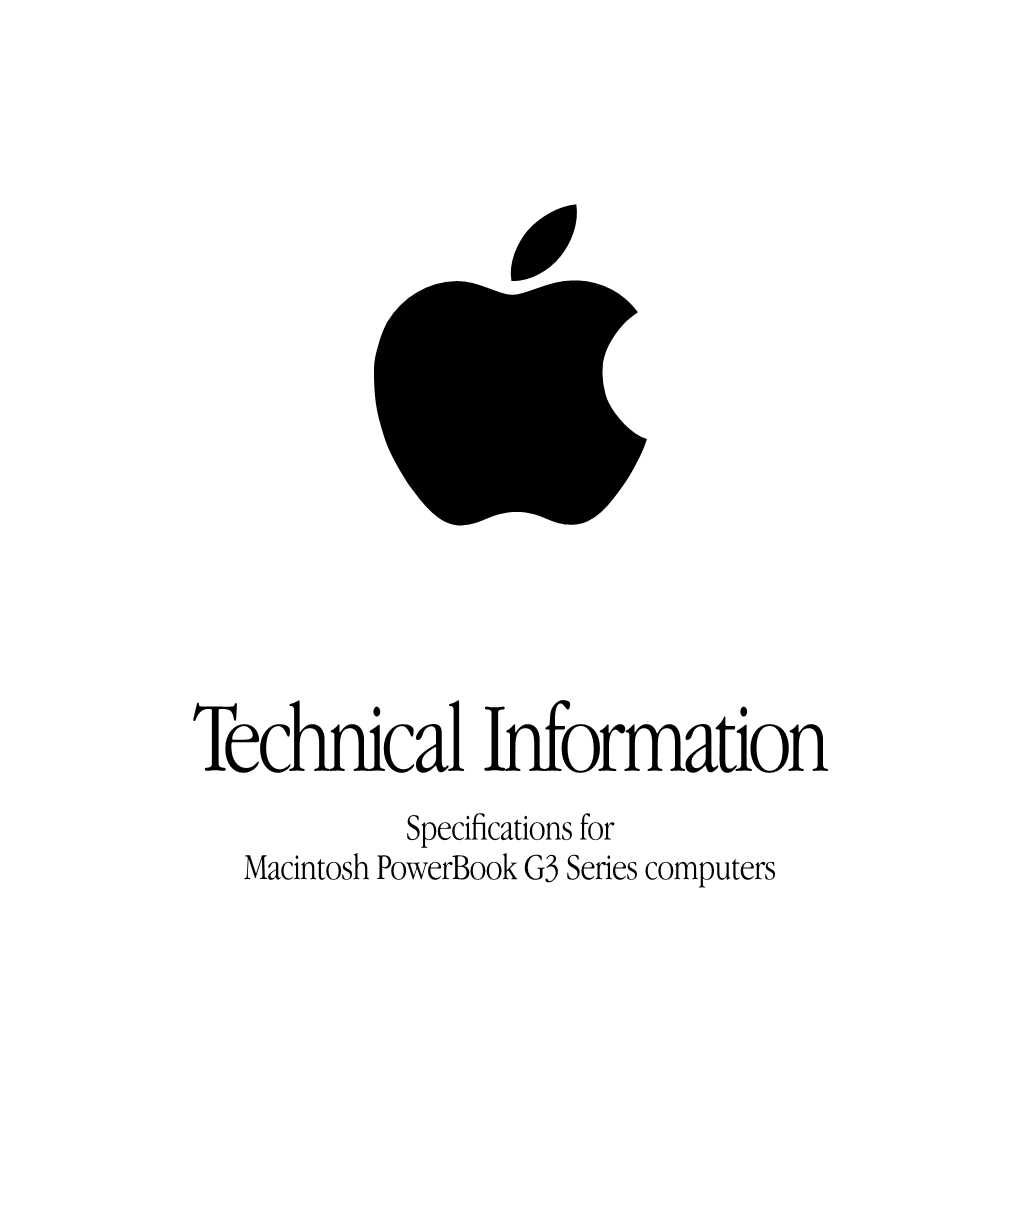 Specifications for Macintosh Powerbook G3 Series Computers